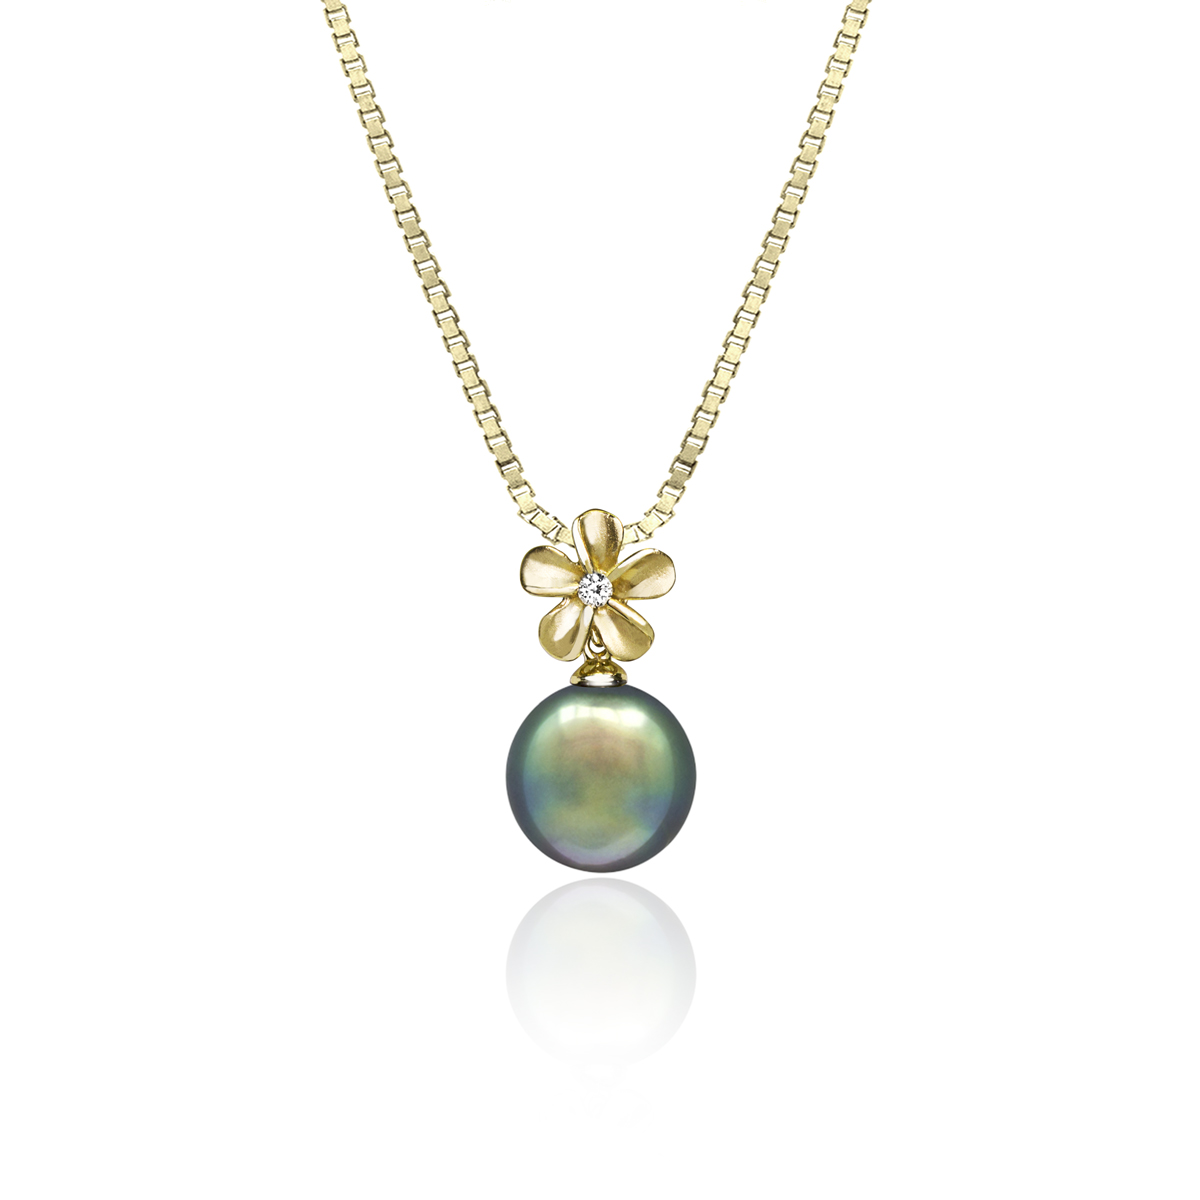 Peacock Green Tahitian Cultured Pearl Pendant Necklace 14K W Gold au585 Chain